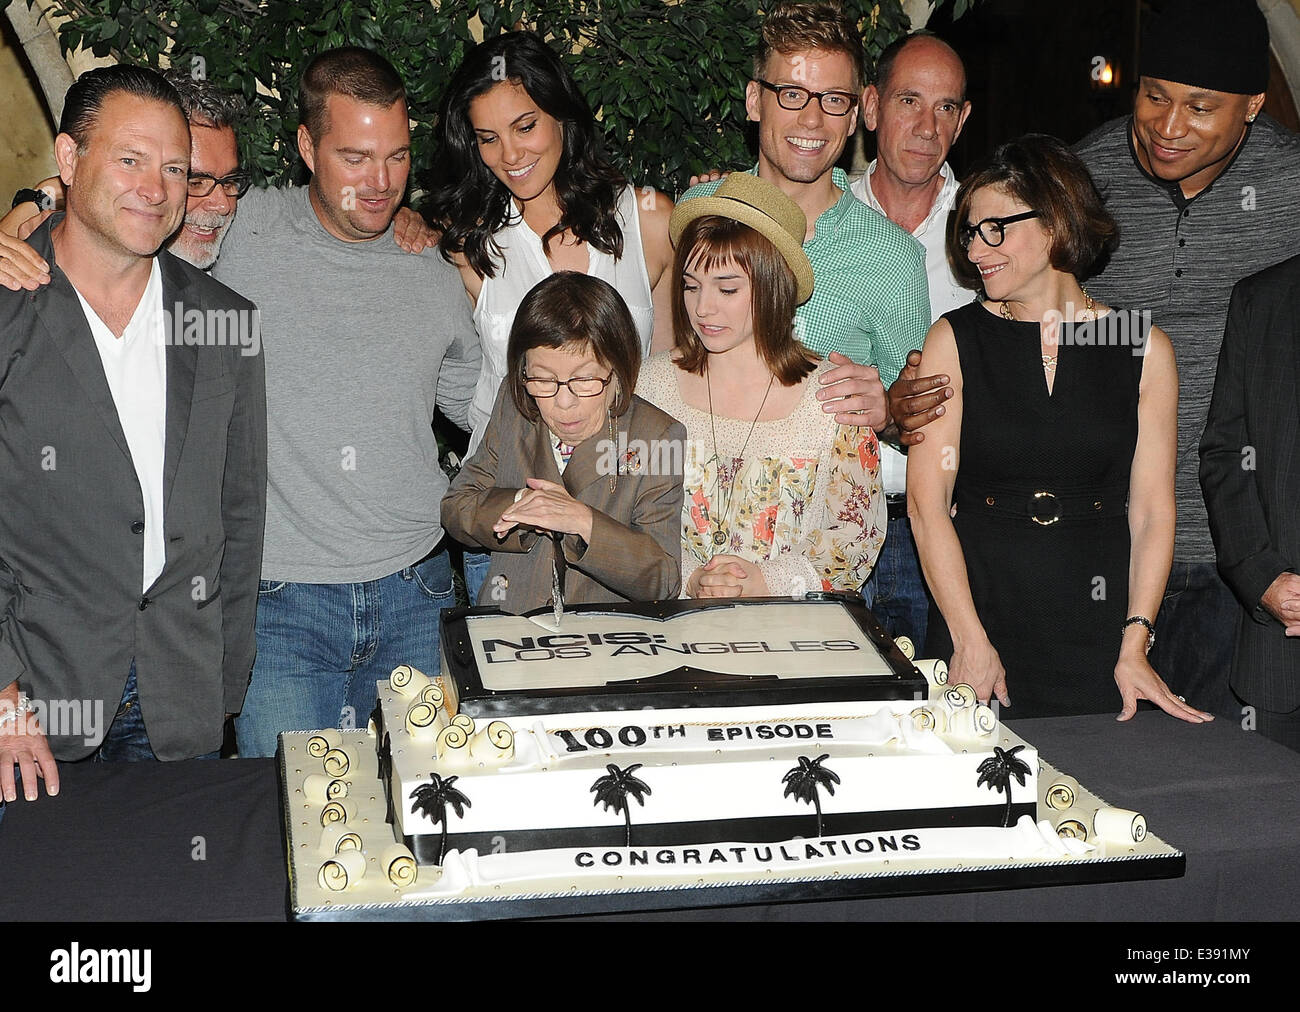 Cast and crew of NCIS: LOS ANGELES on set for a cake-cutting to celebrate the filming of their 100th episode.  (Episode to air on Tuesday, October 15th)  Featuring: Eric Christian Olsen,R. Scott Gemmill,John Peter Kousakis,Chris O'Donnell,Daniela Ruah,Lin Stock Photo